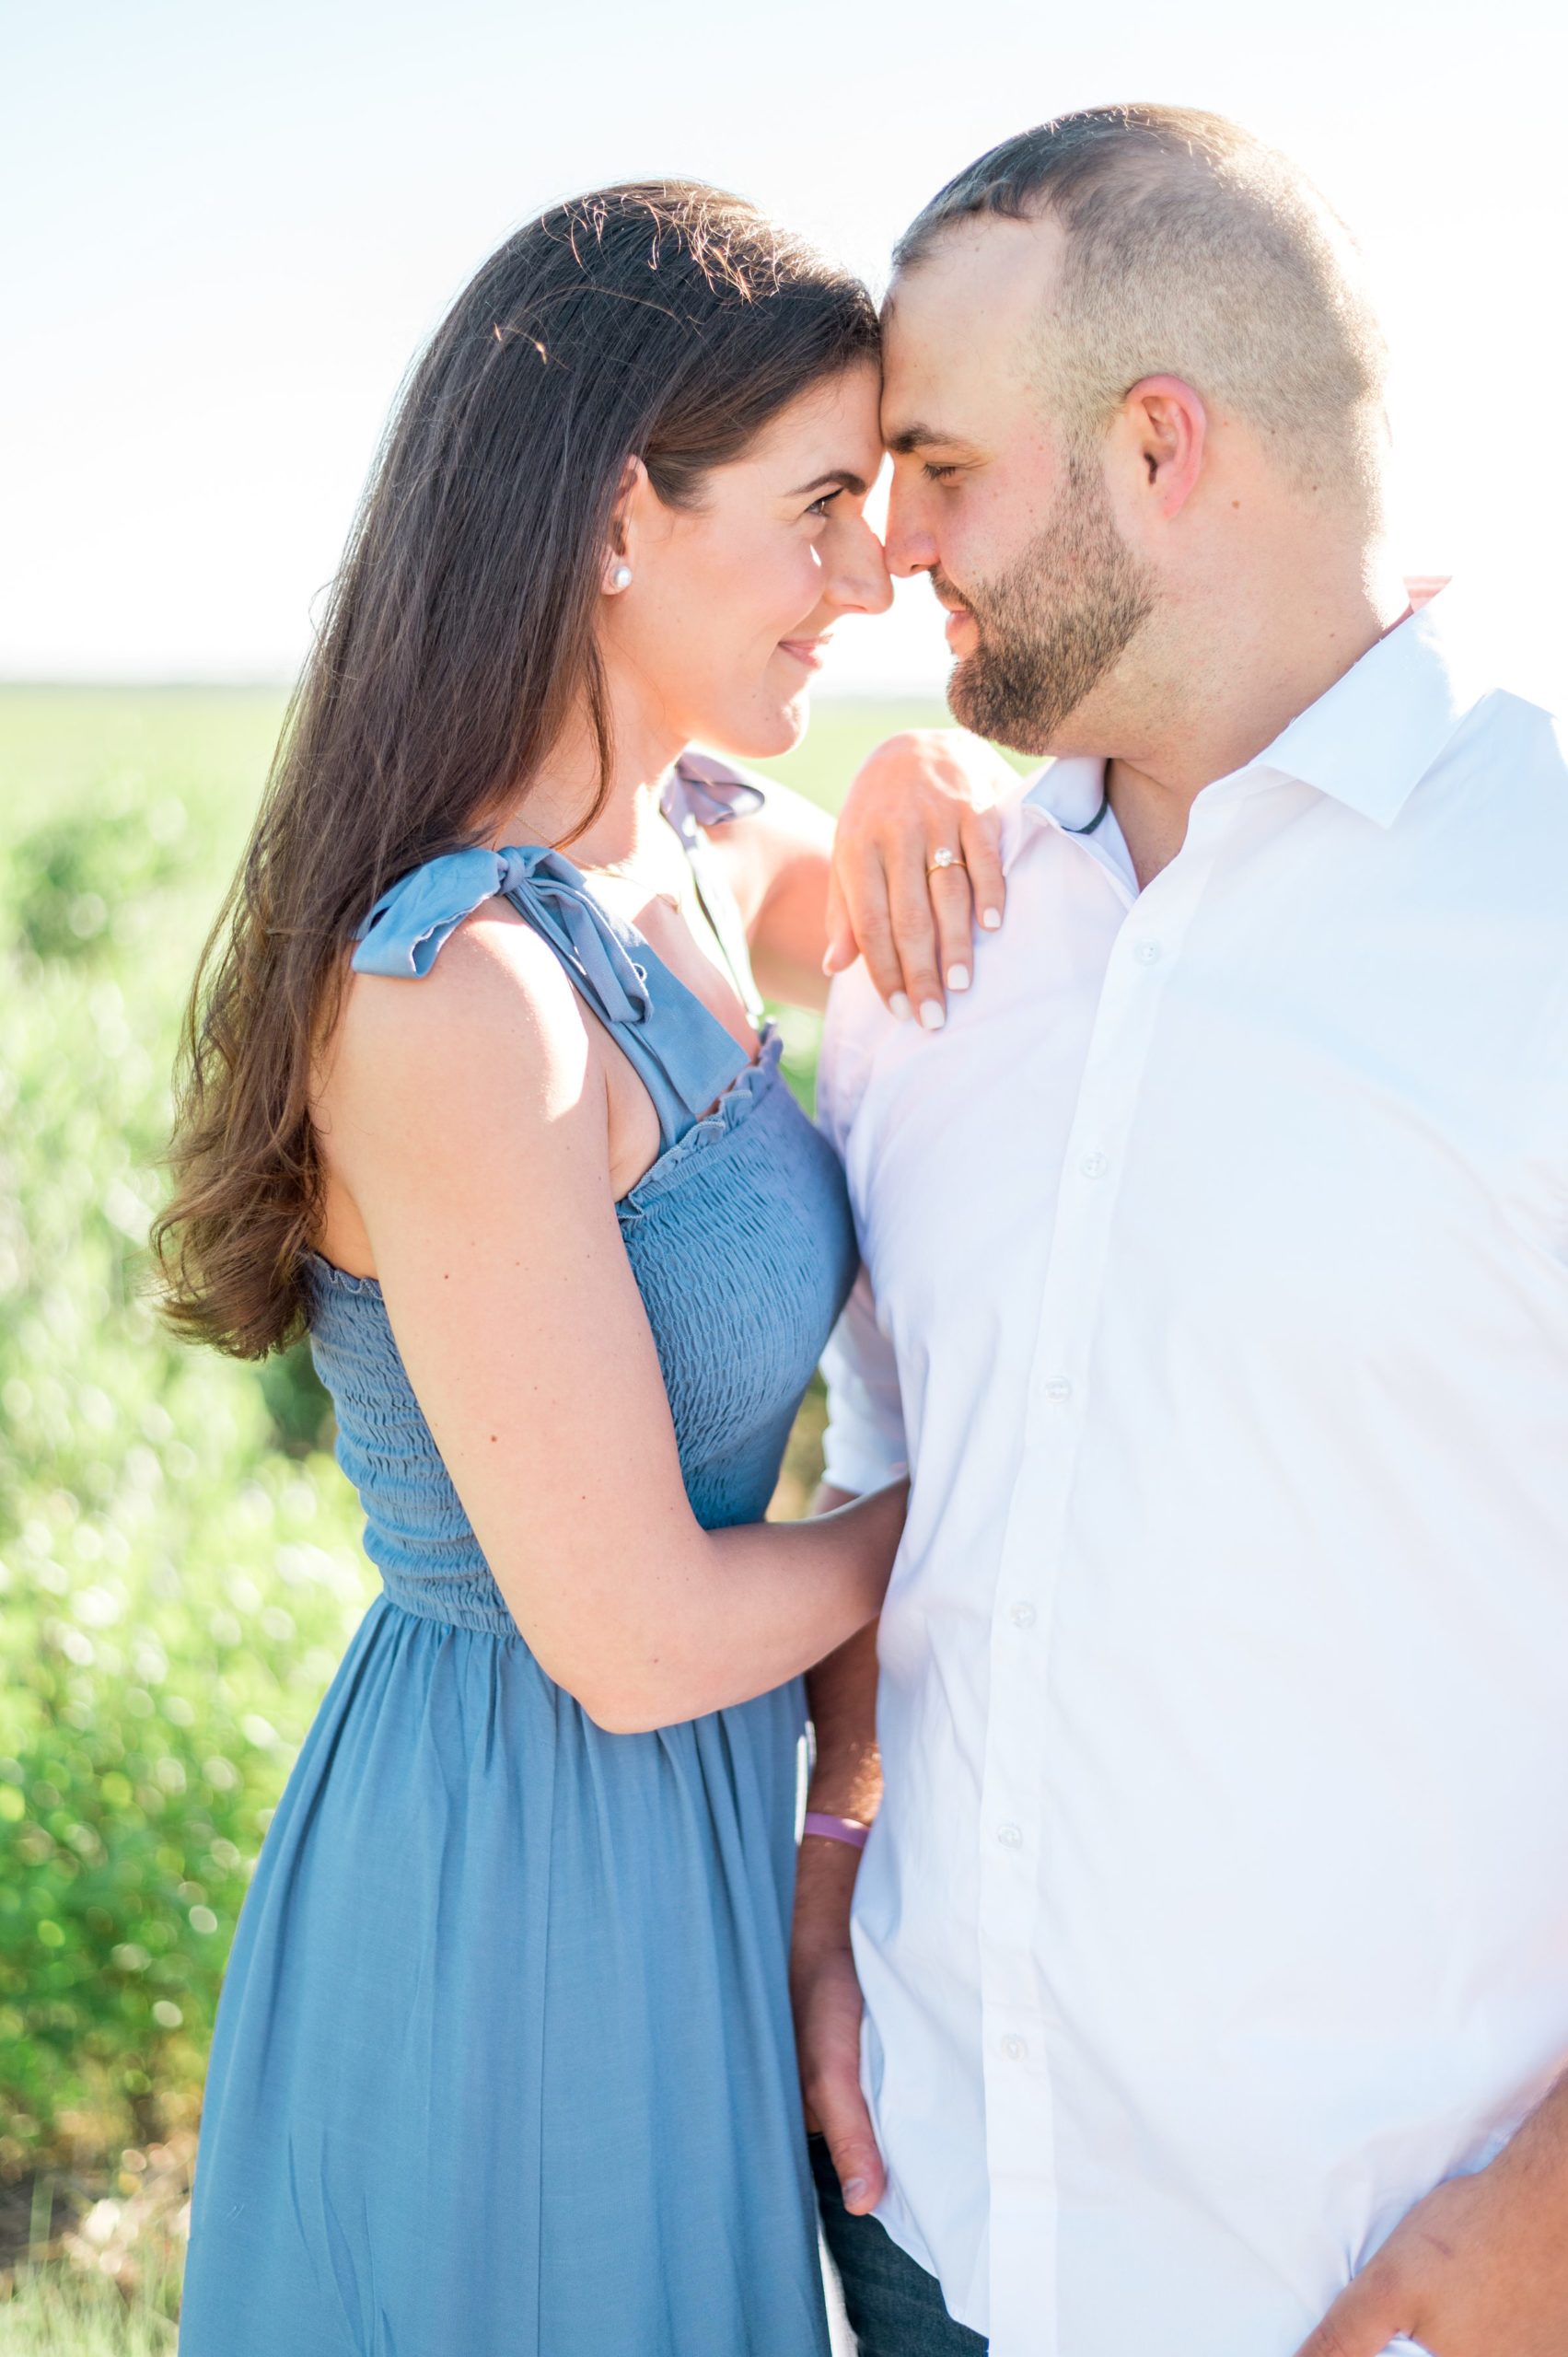 Cape Cod beach engagement session in Dennis, MA